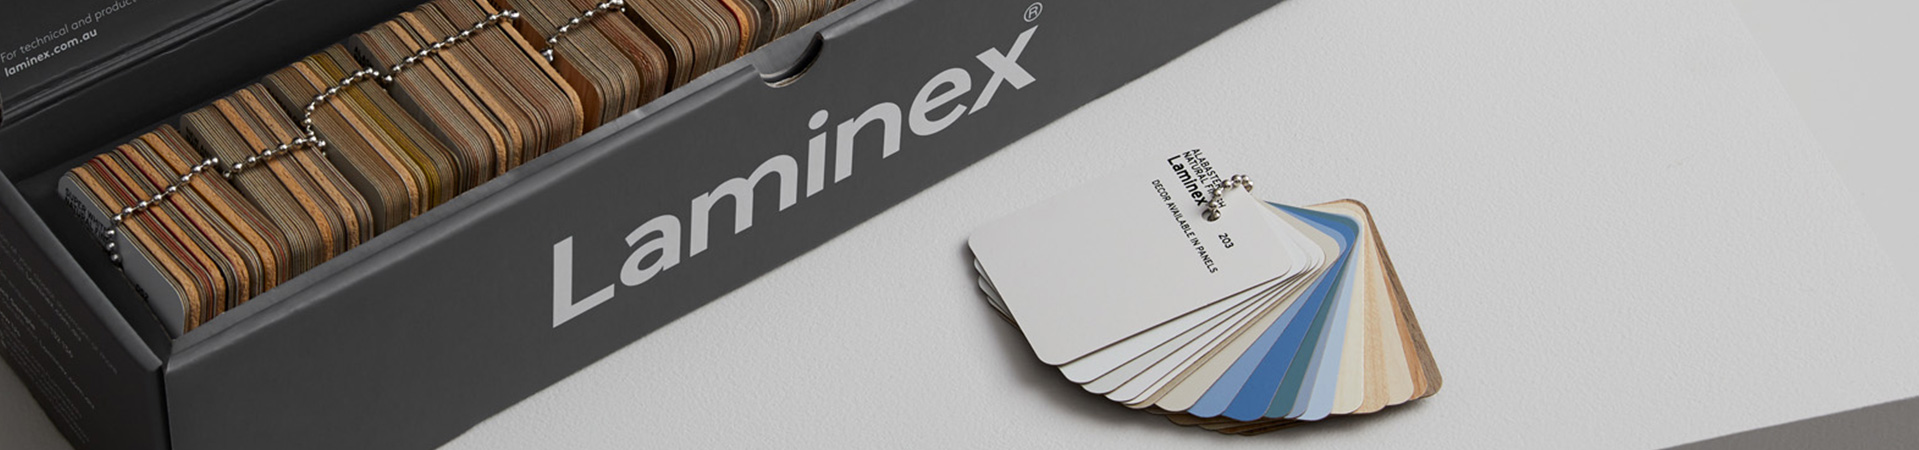 laminex specifier accounts Detail Page Media 1